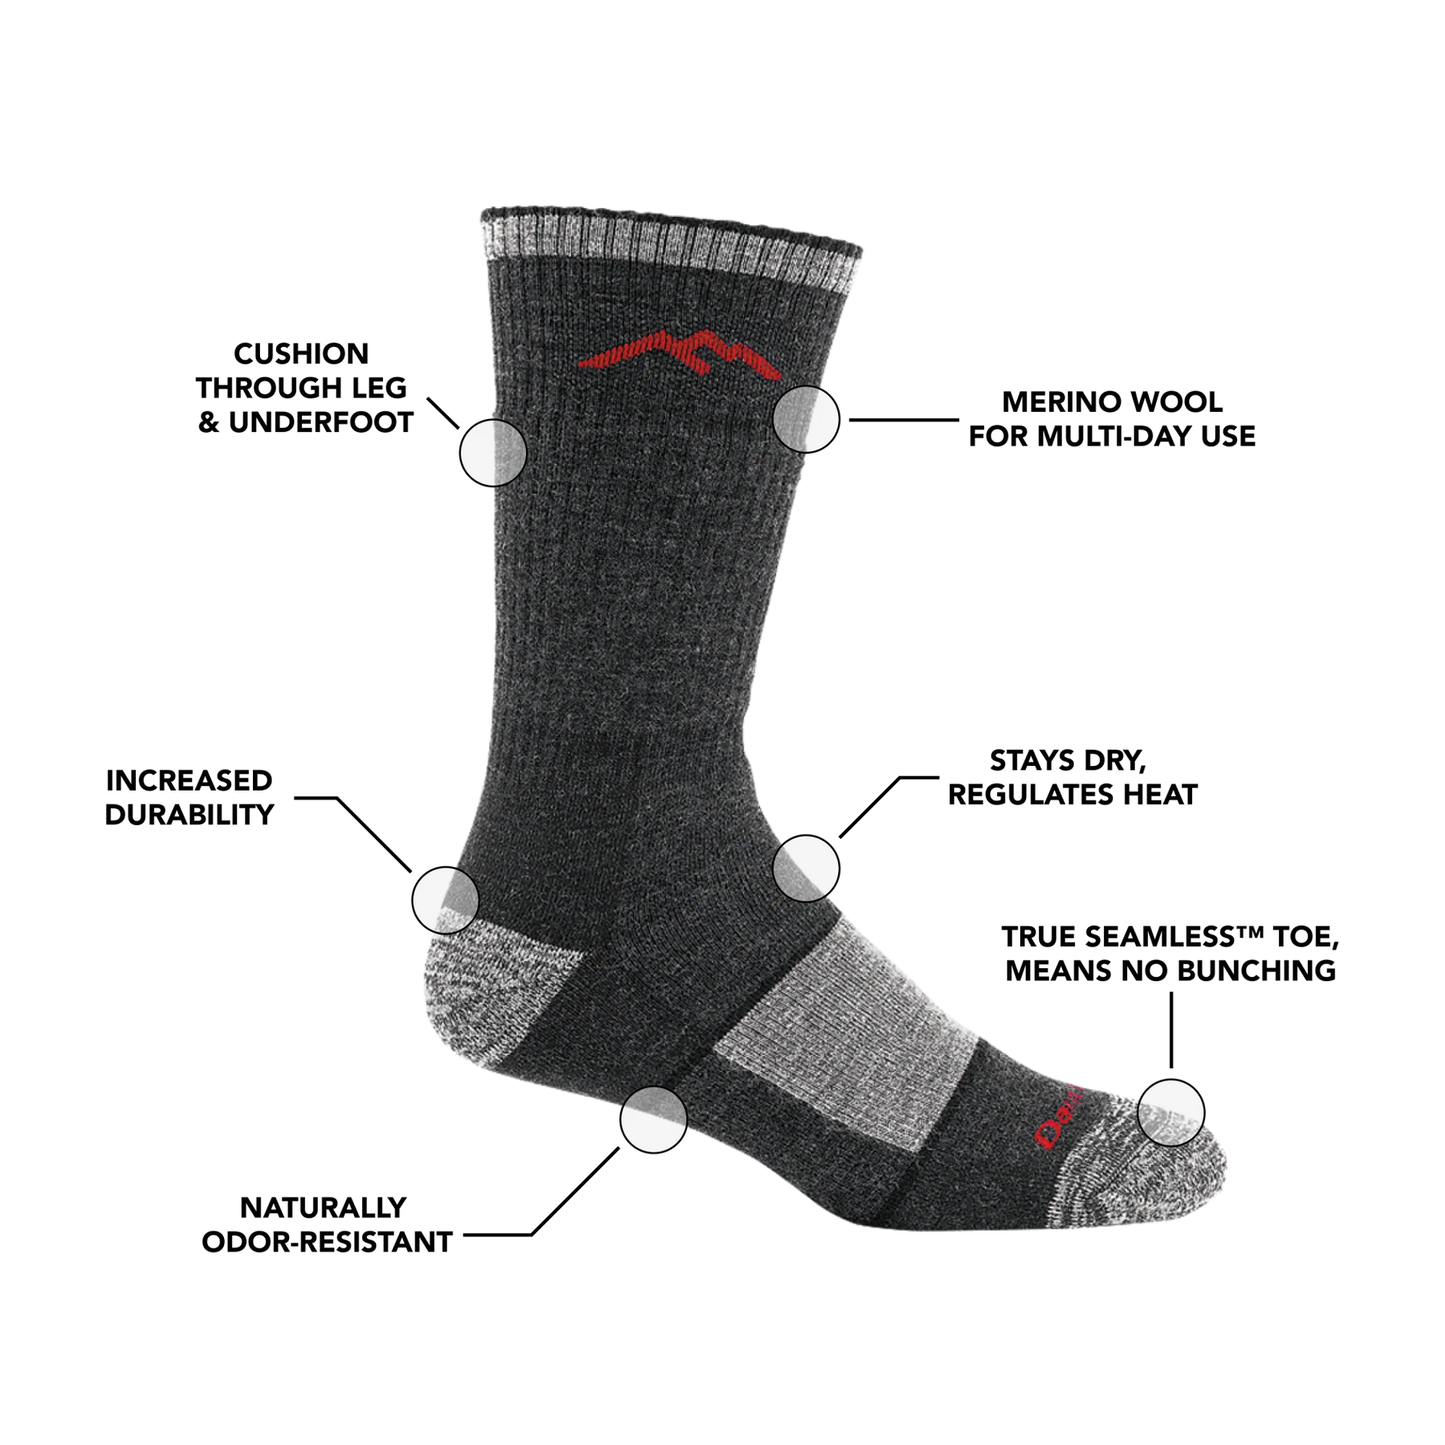 Darn tough olive green sock with labeled sock features